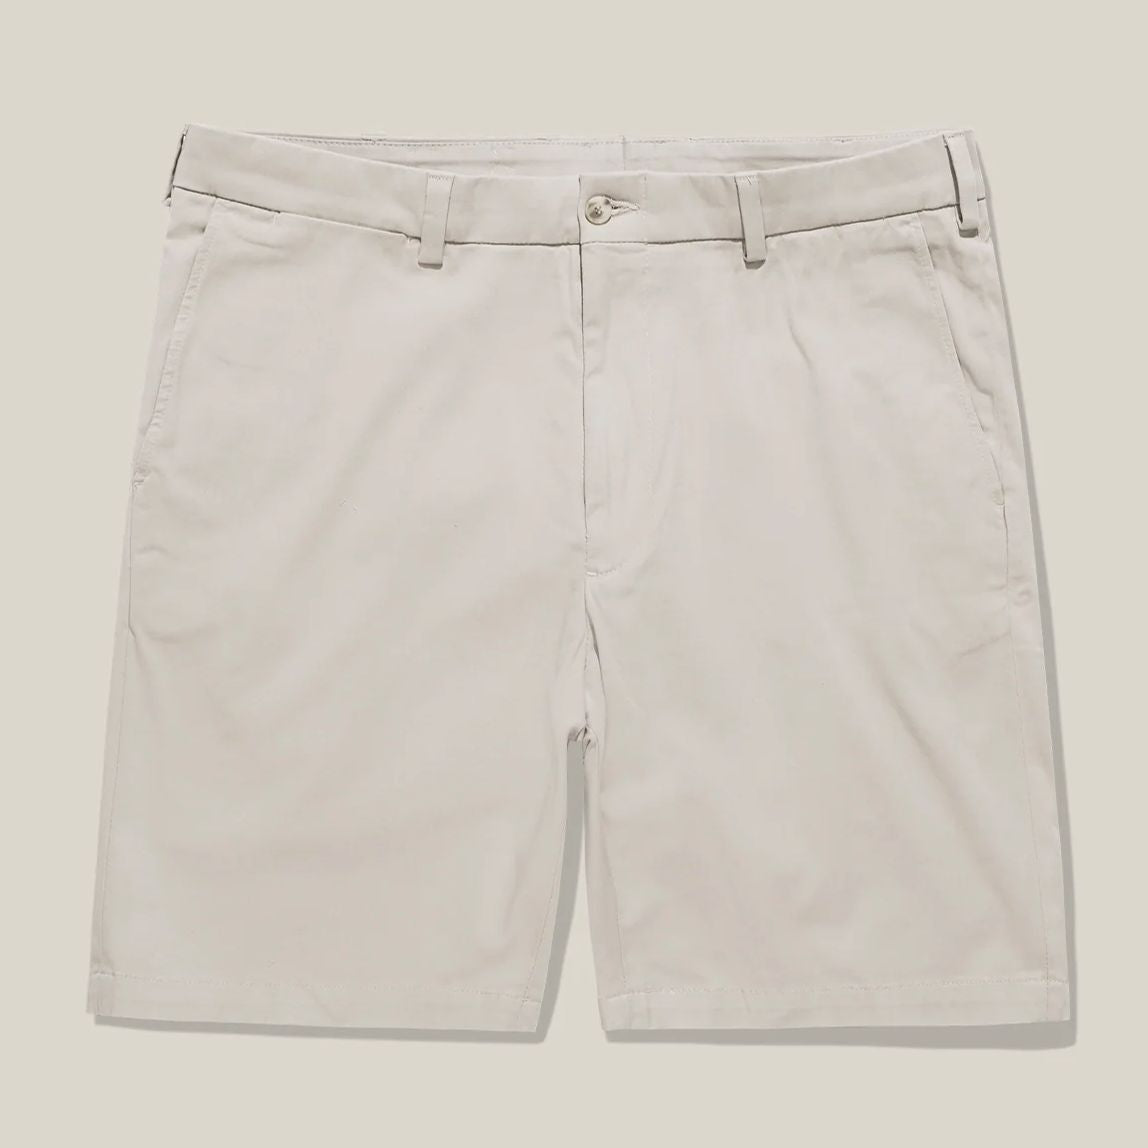 M3 Straight Fit Clubhouse Twill (Smart Khaki) Shorts in Oyster by Bills Khakis